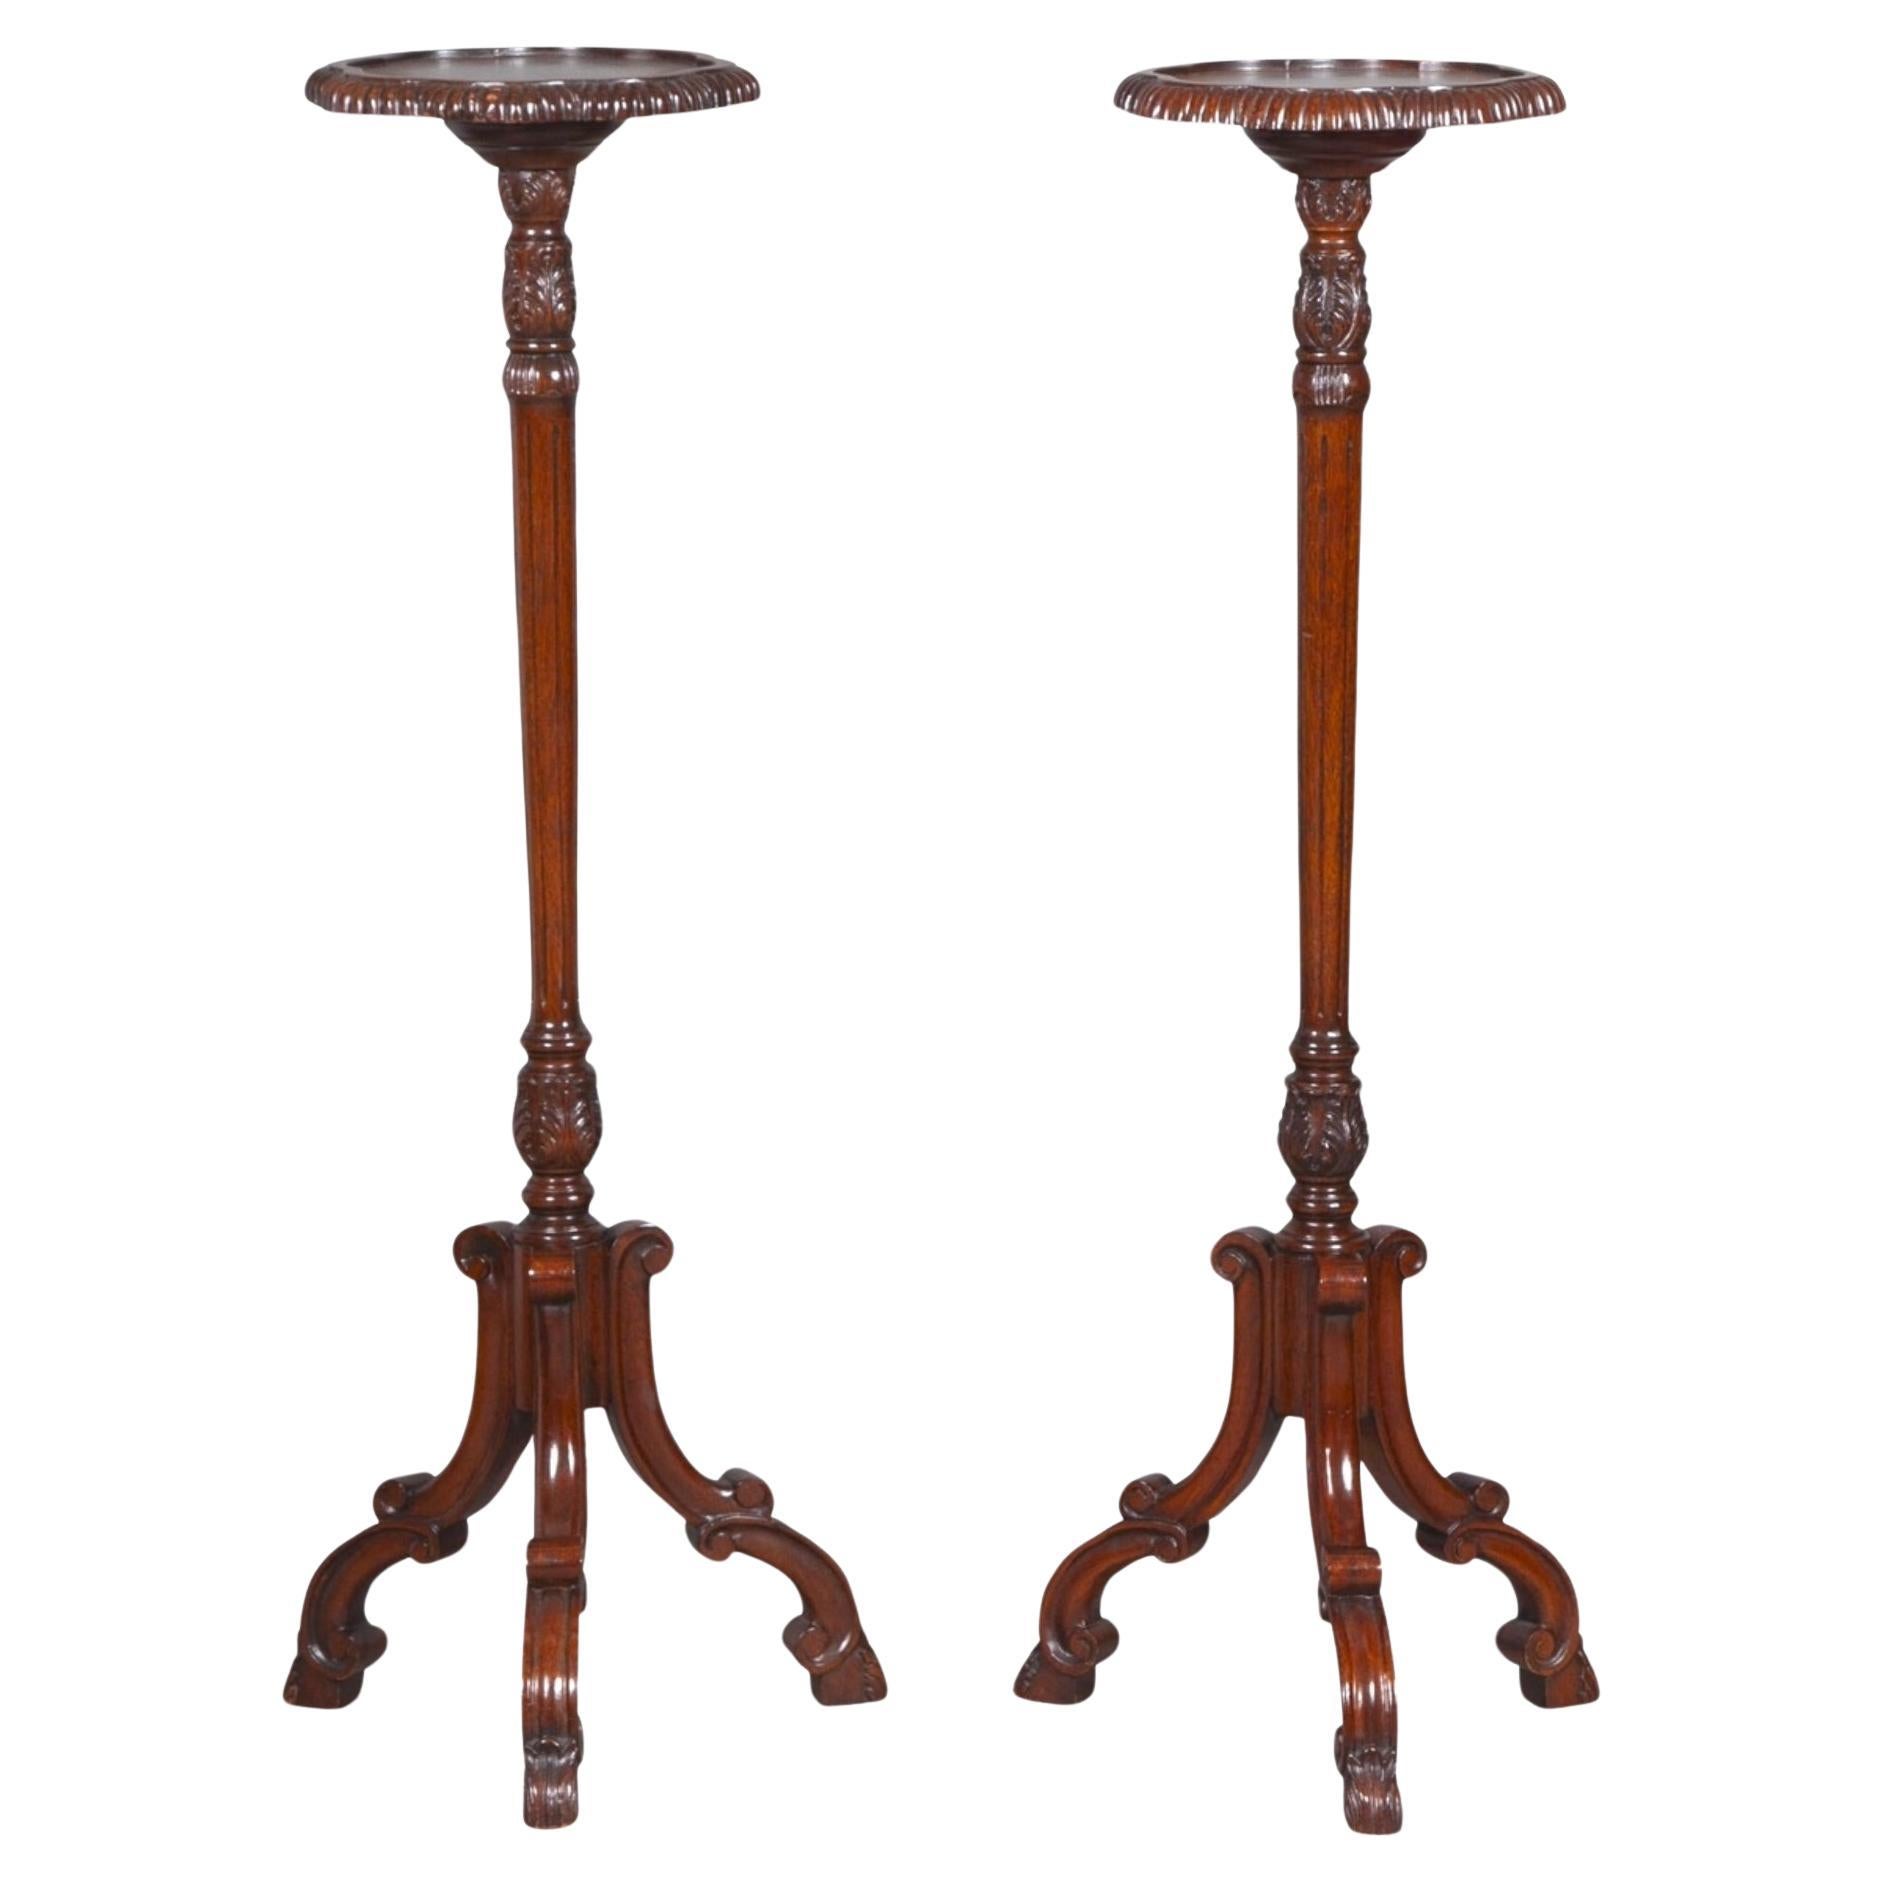 19th Century English Chippendale Style Pair Tripod Foot Candle Stand / Pedestal For Sale